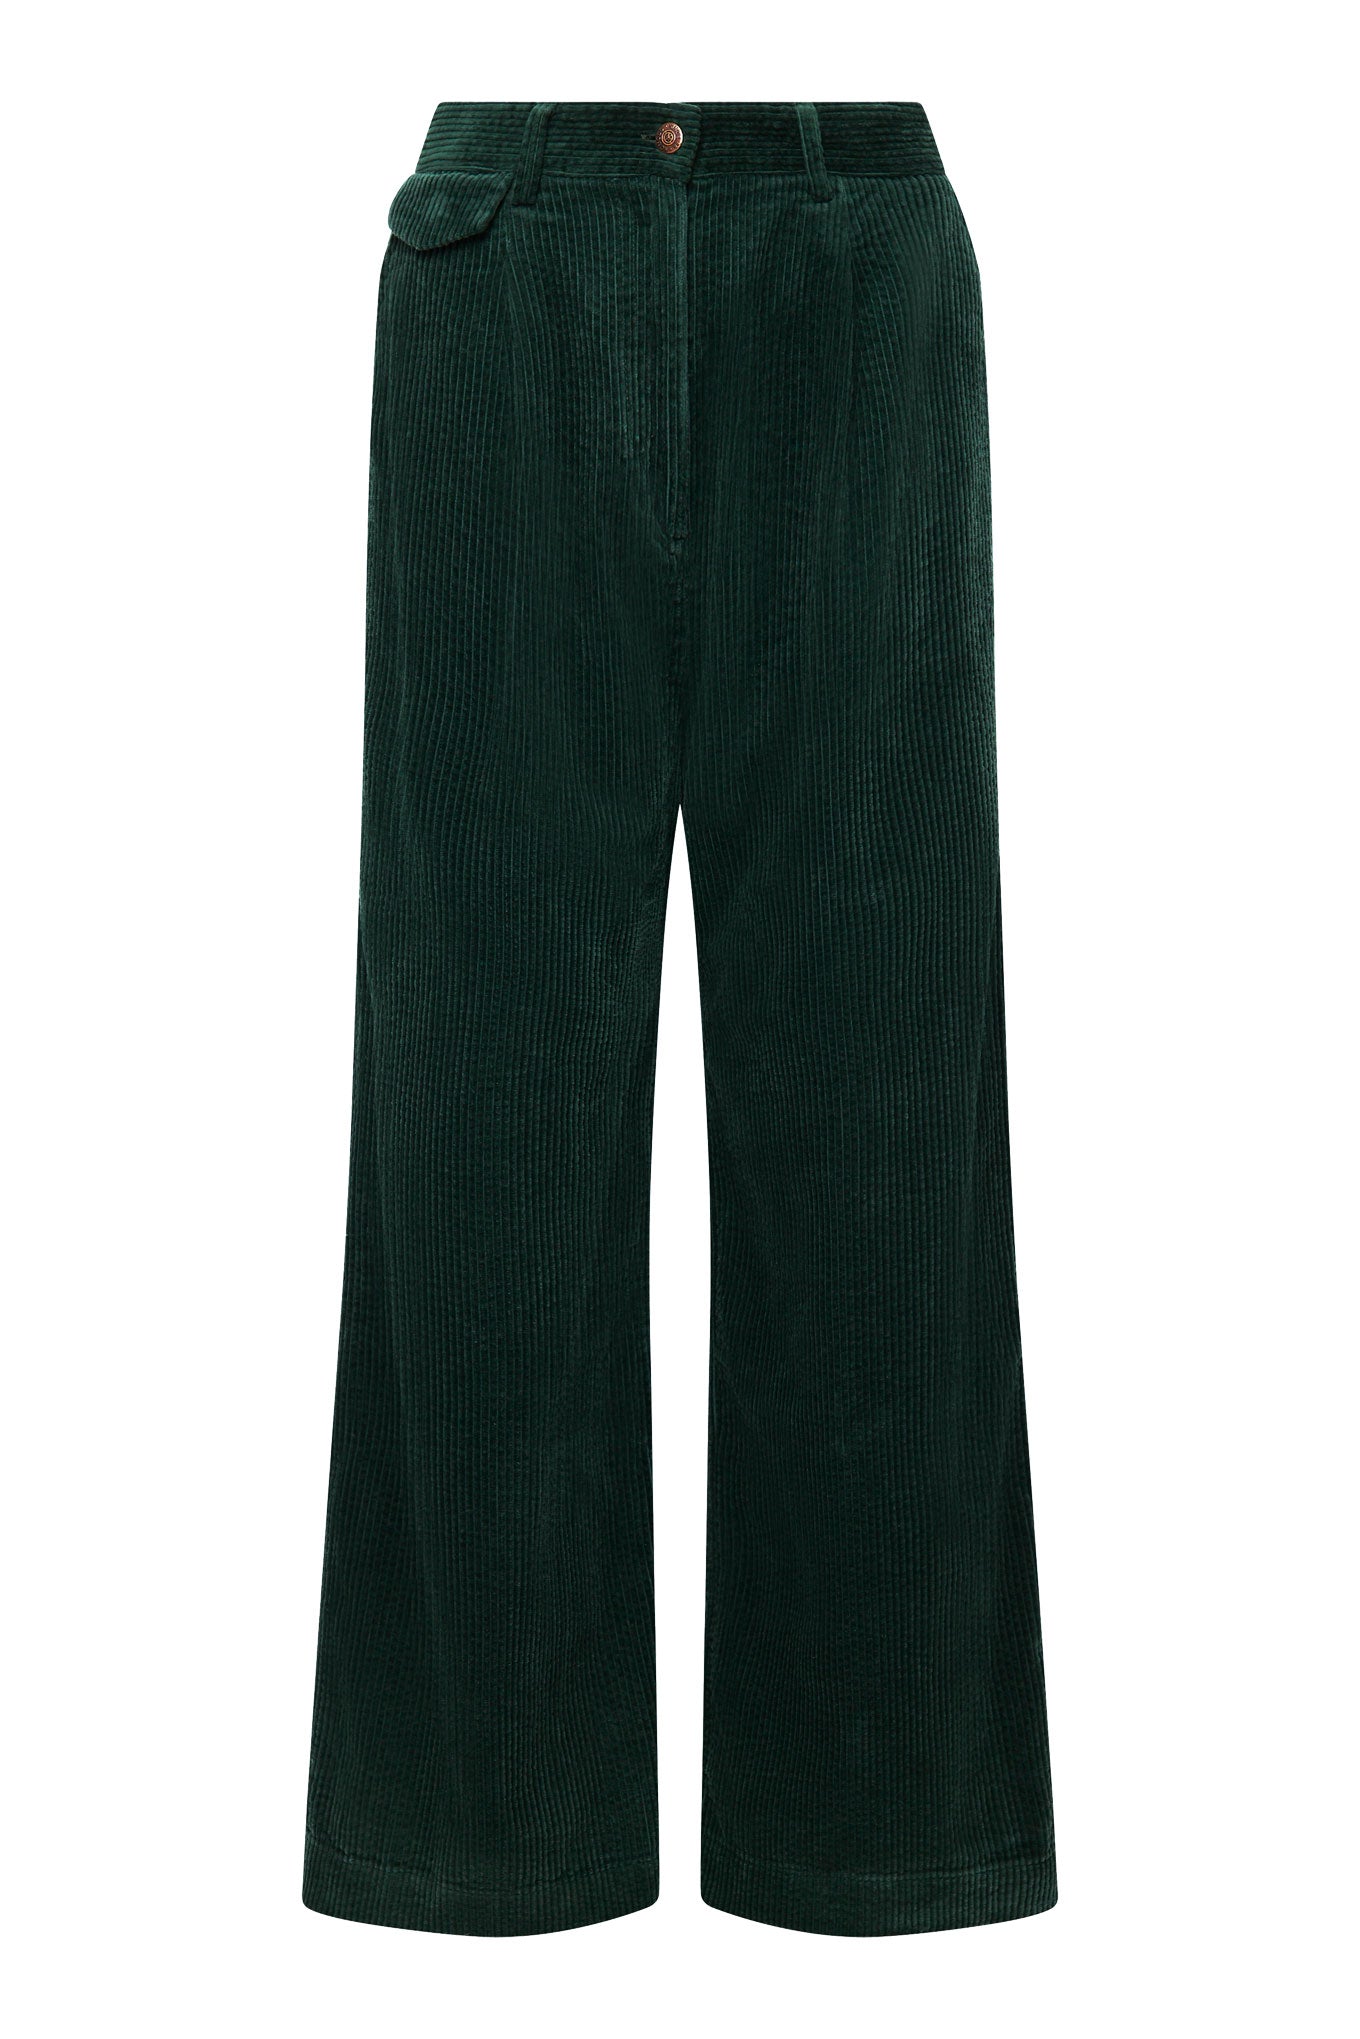 Dark green, wide corduroy trousers TIGER made from organic cotton by Komodo